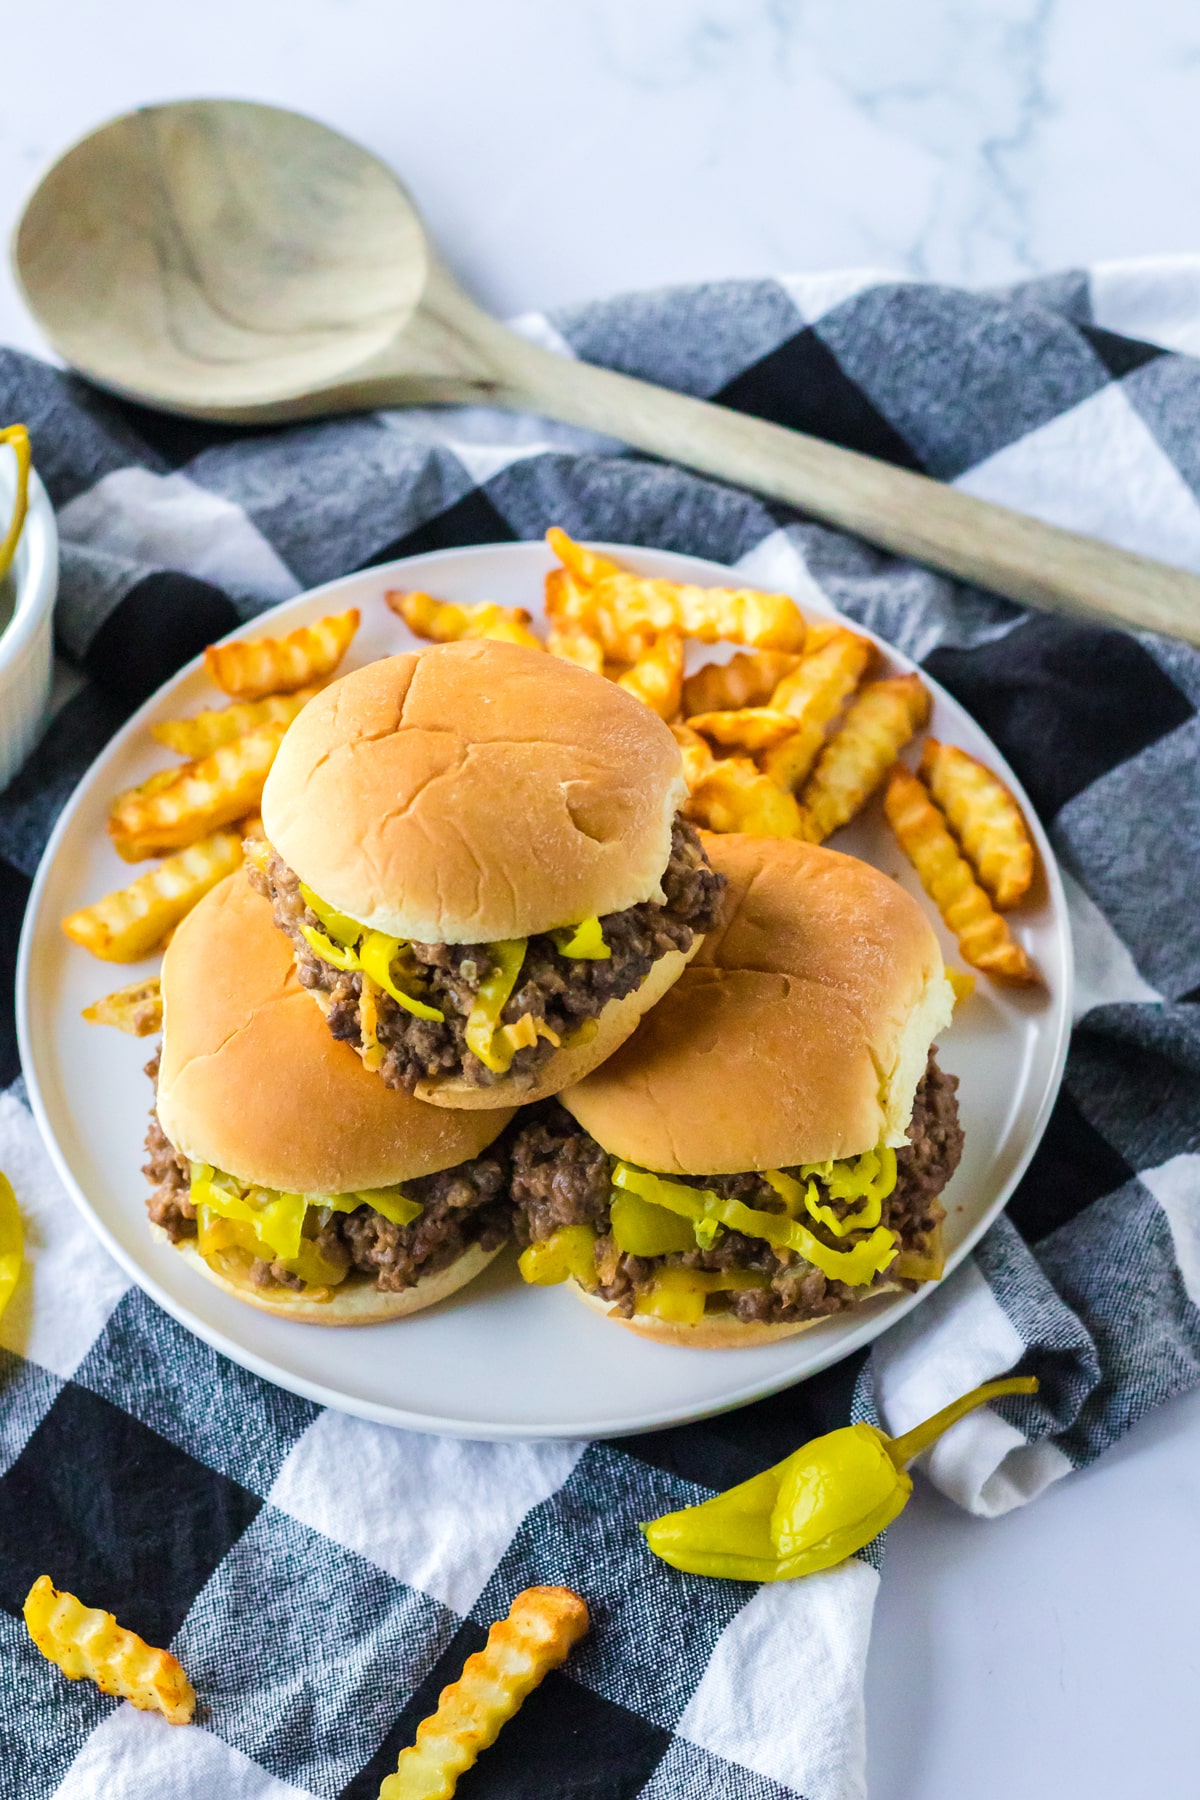 Slow Cooker Mississippi Sloppy Joes on a plate with fries and ketchup.